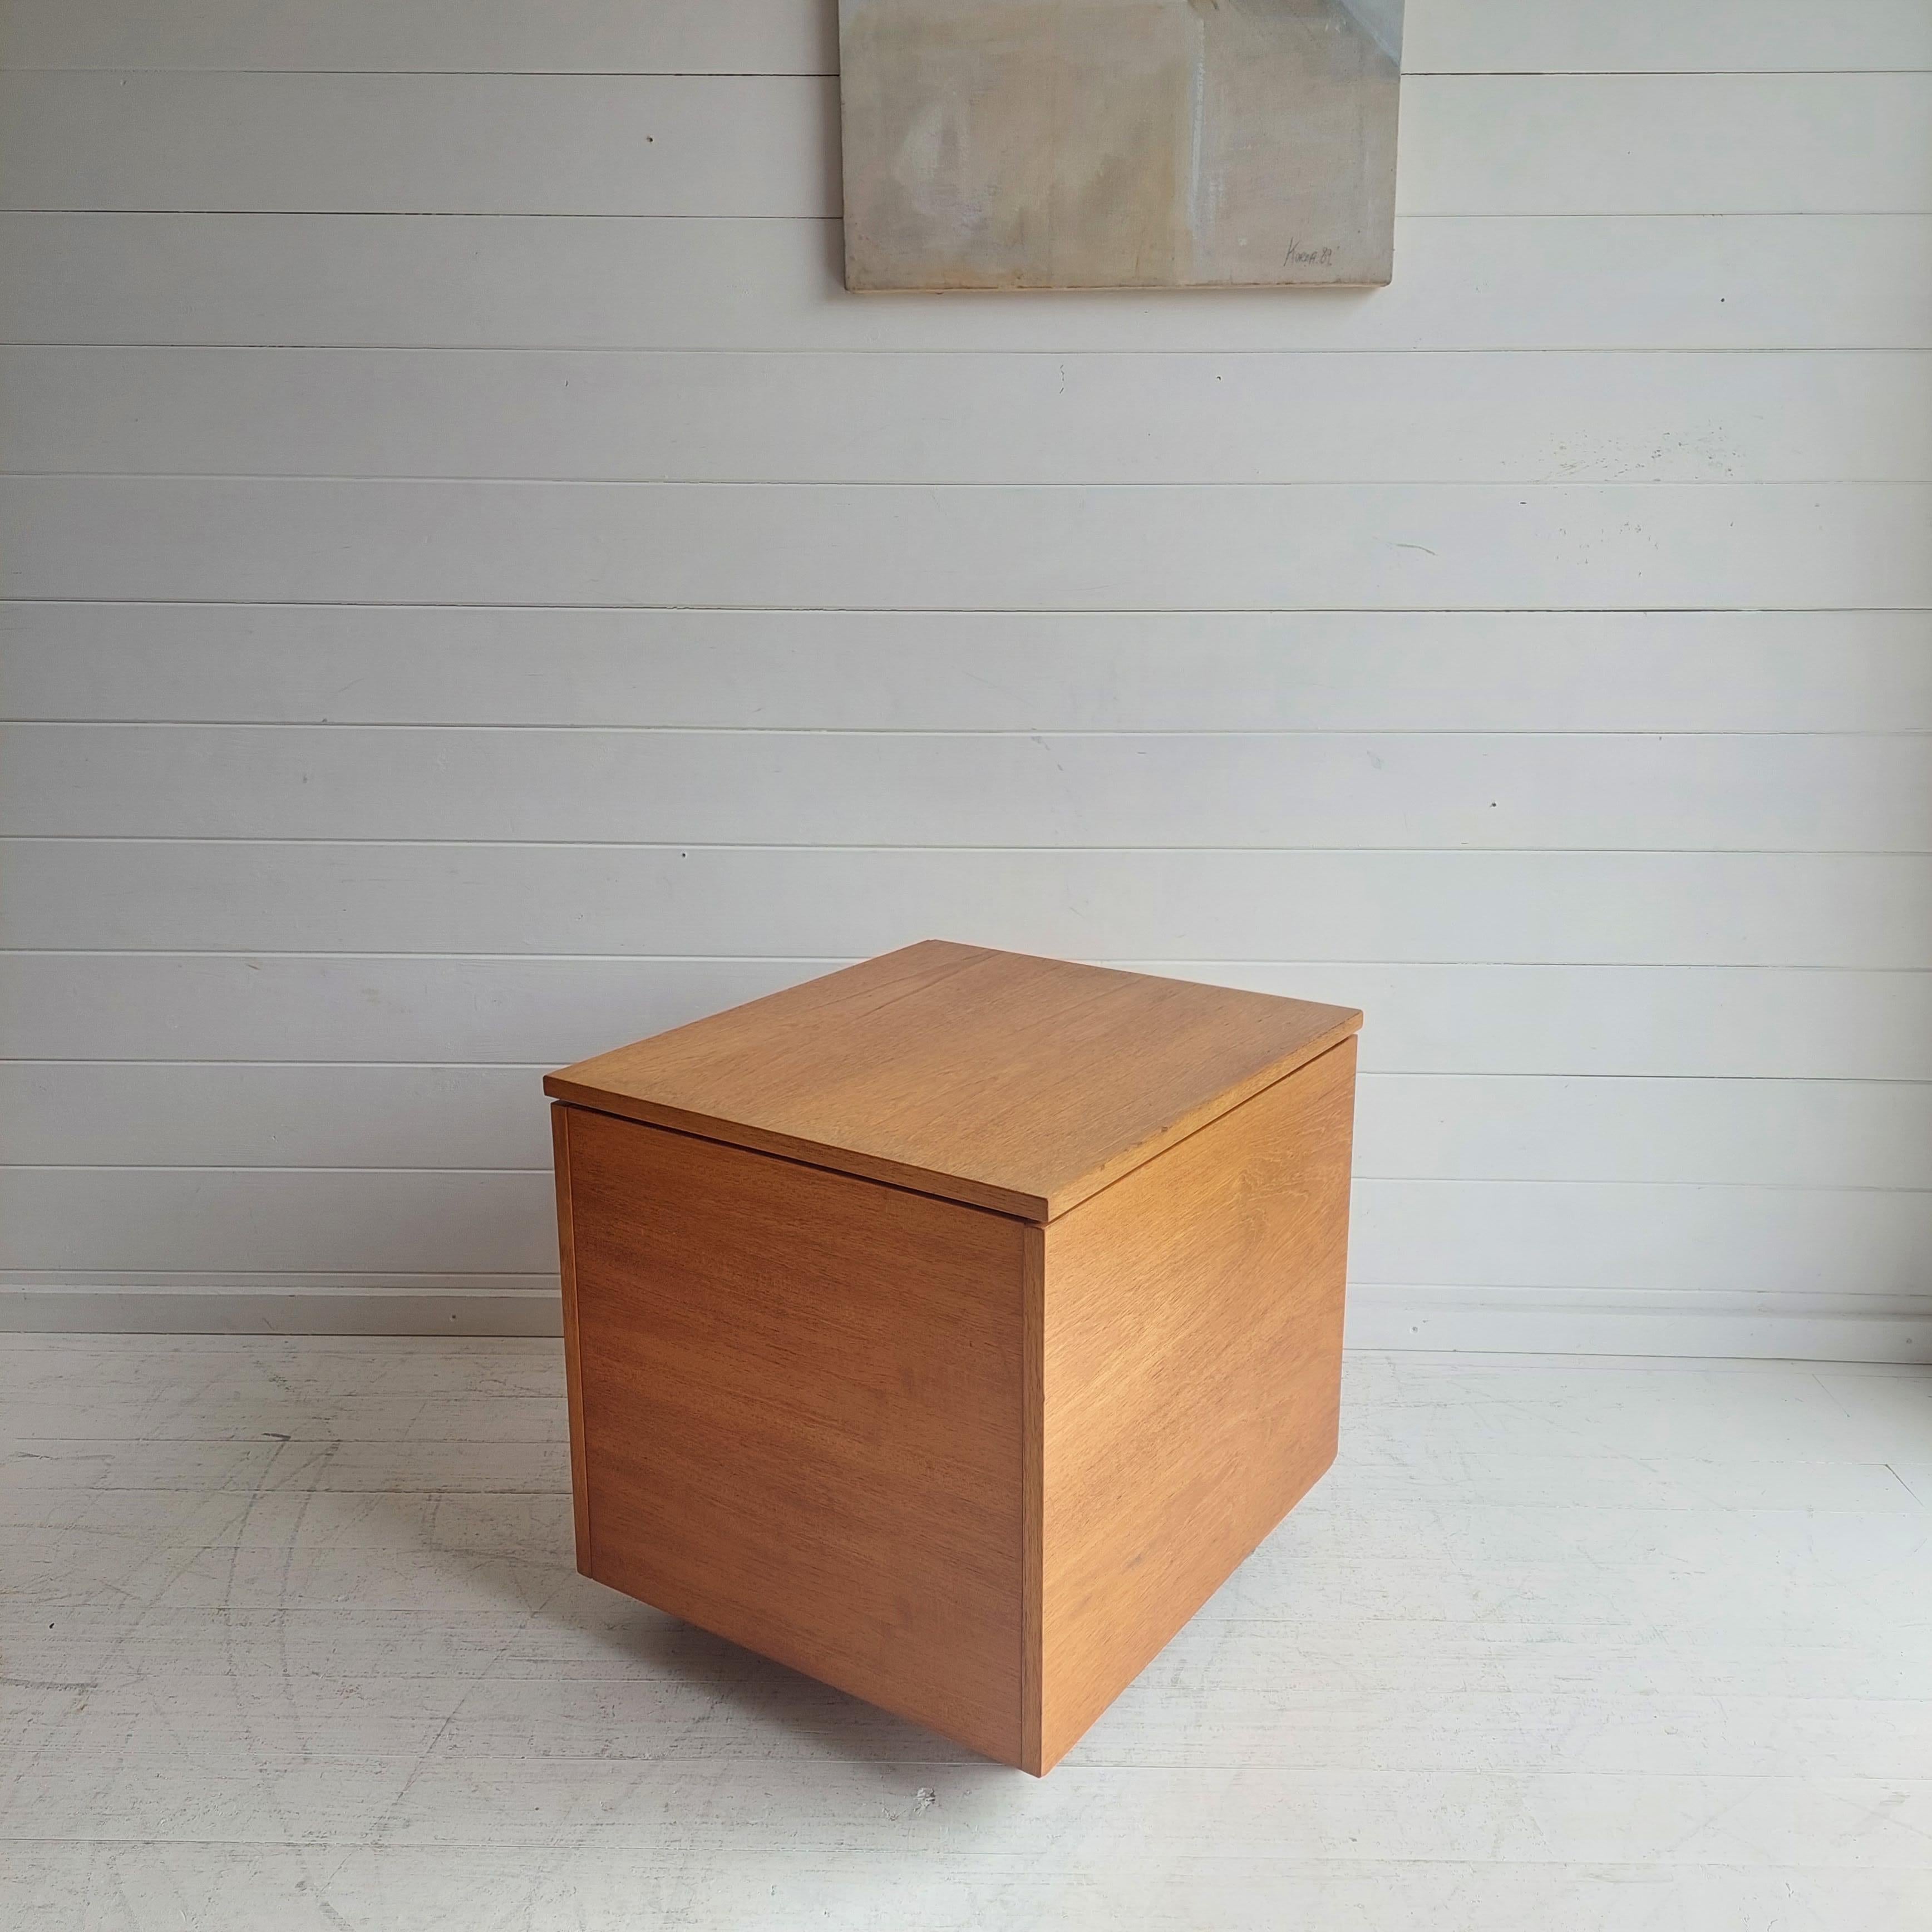 A teak record cabinet box by Ellitos of Newbury
Design Period - 1960 to 1969
Style - Mid-Century

This nearly square shaped piece has lost of possibilities: Side table, Nightstand, ottoman......
It features: 
Cube design 
Wheels for easy